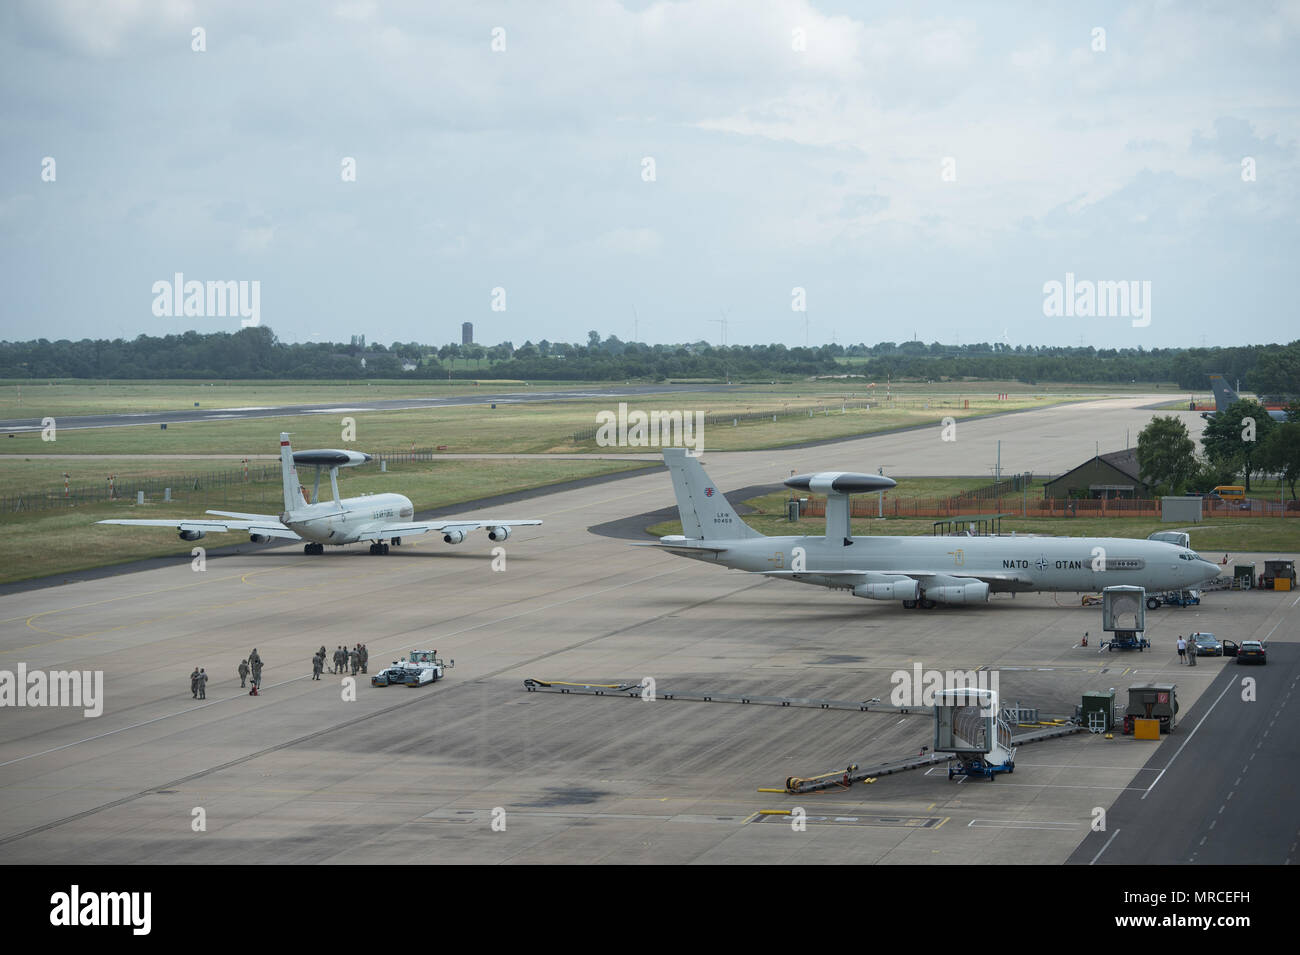 A U.S Air Force E-3 Sentry taxis past a NATO E-3A Airborne Warning and Control System aircraft on June 7, 2017, at NATO Air Base Geilenkirchen, Germany. The aircraft and nearly 100 reservists from the 513th Air Control Group are deployed in support of BALTOPS 2017, which is the first time a U.S. E-3 Sentry has supported a NATO exercise in 20 years. (U.S. Air Force photo/2nd Lt. Caleb Wanzer) Stock Photo